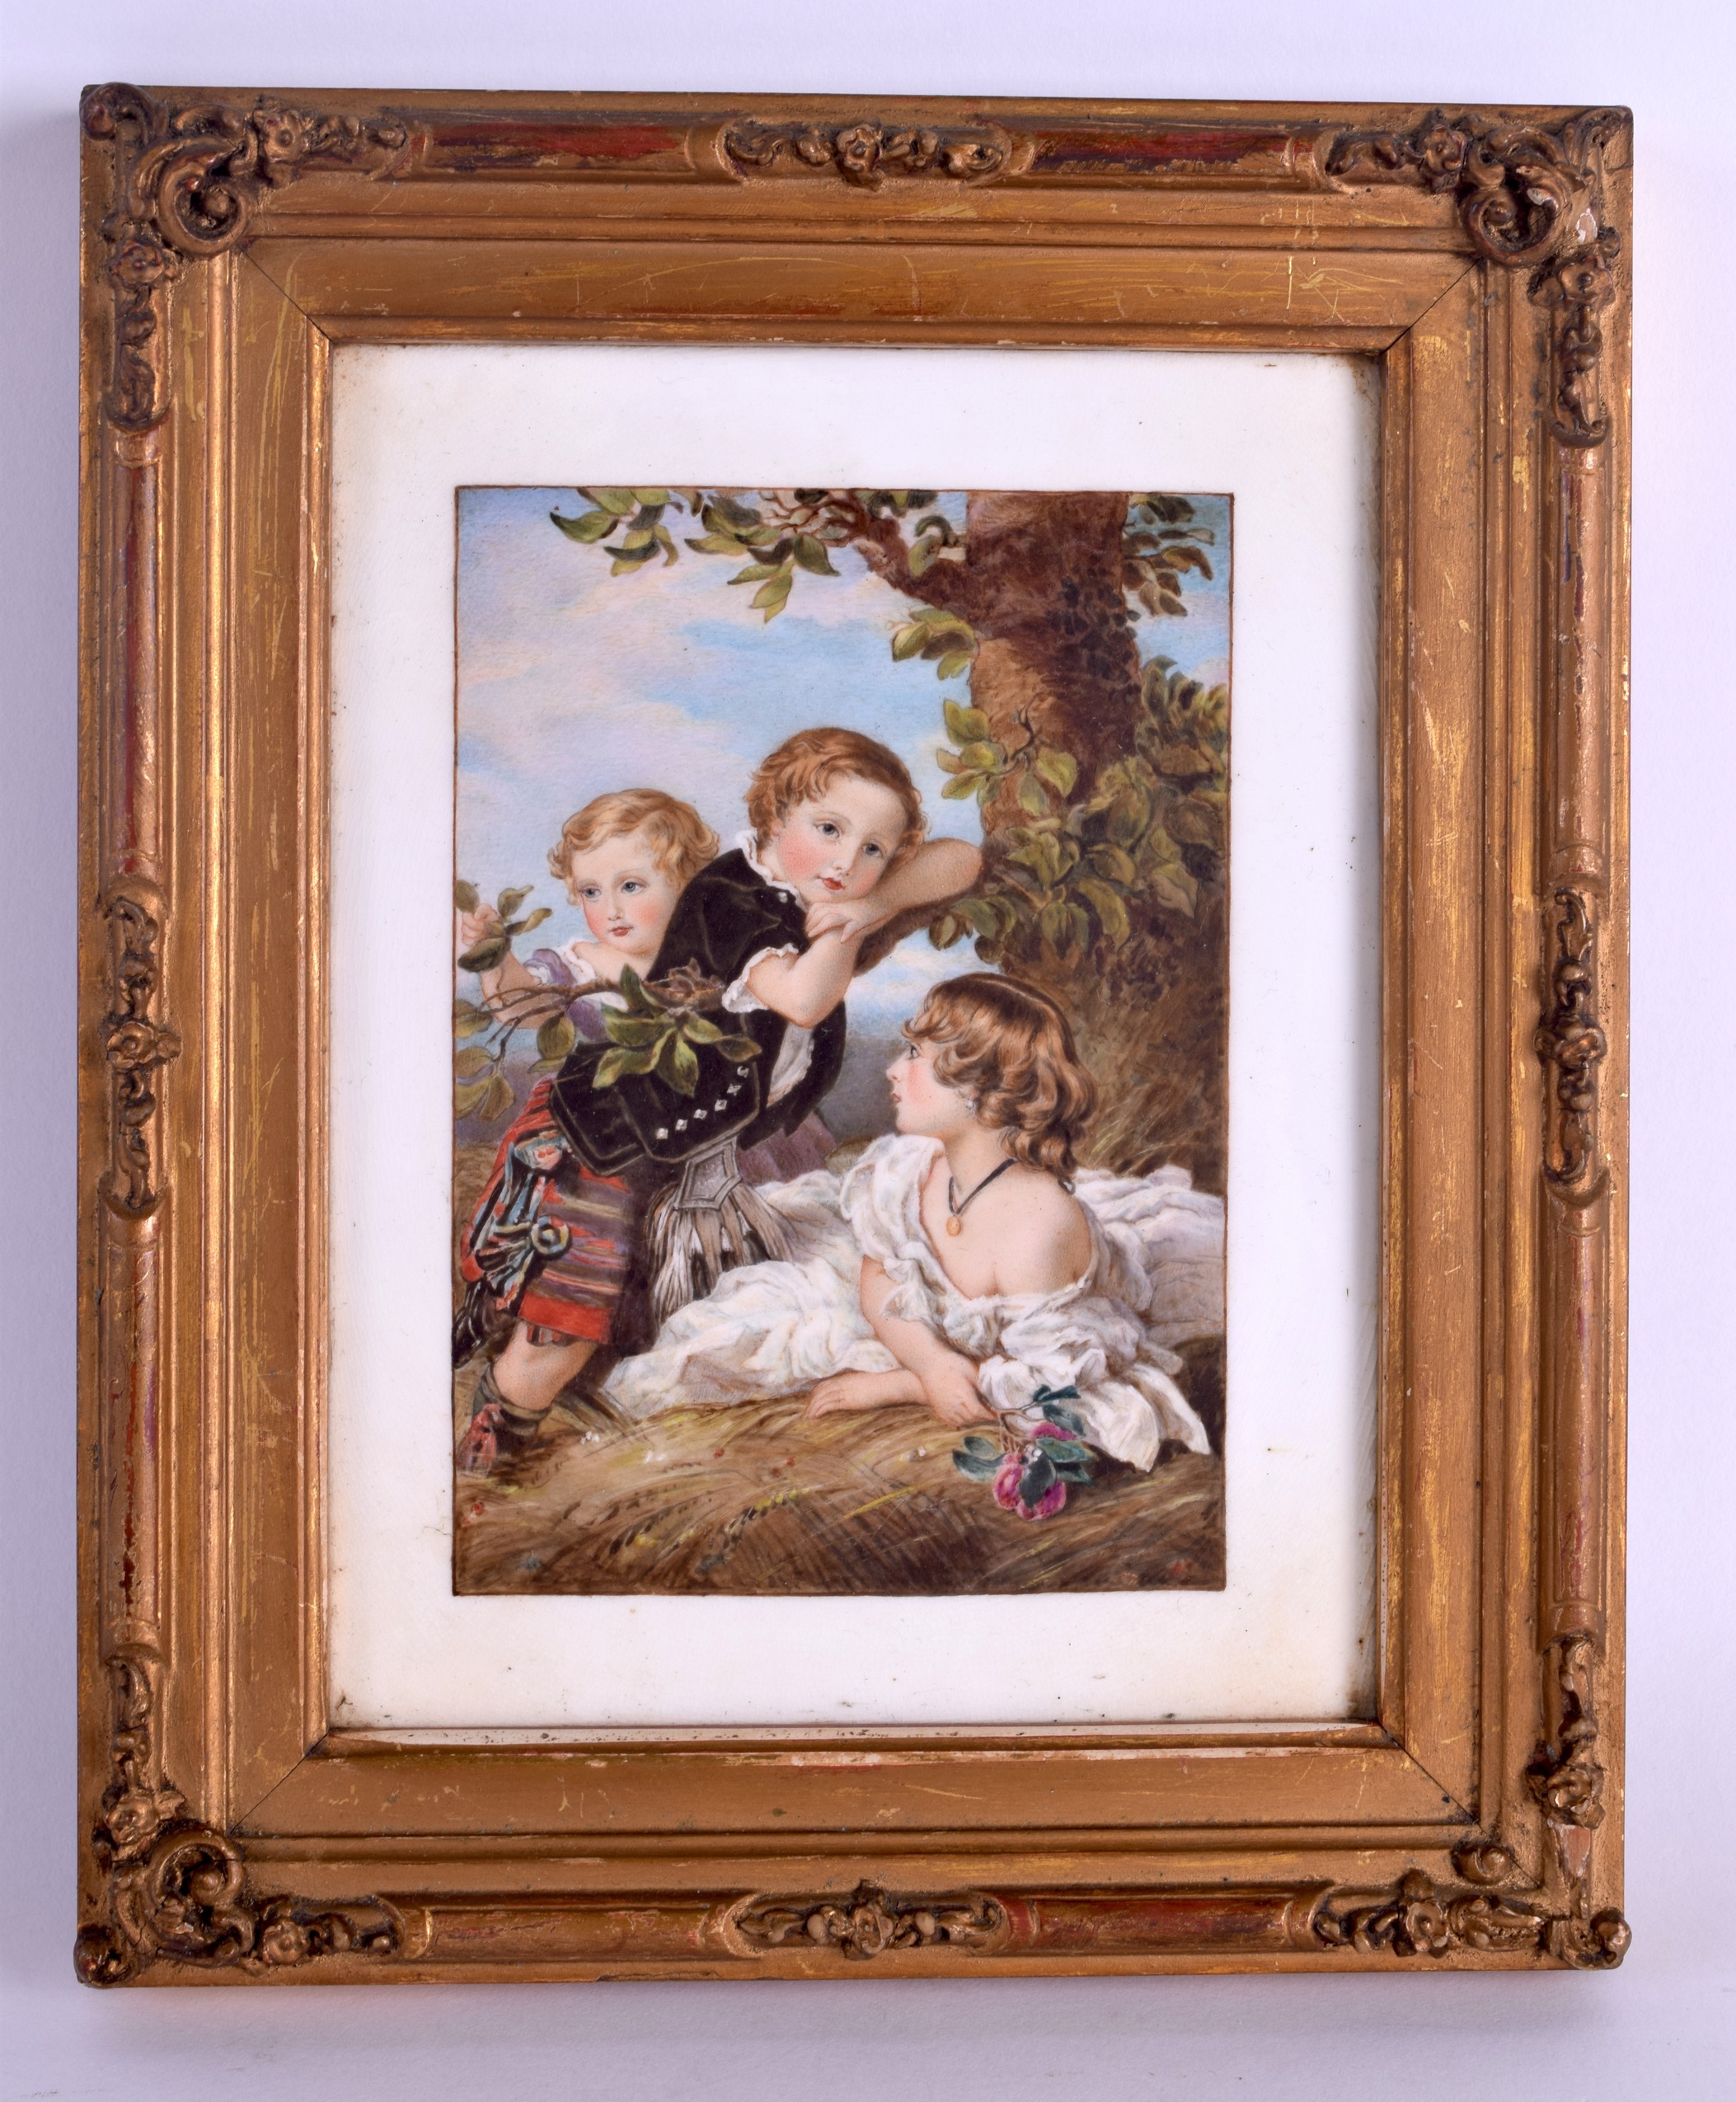 A 19TH CENTURY ENGLISH PORCELAIN PLAQUE of Scottish interest, painted with a young boy in highland